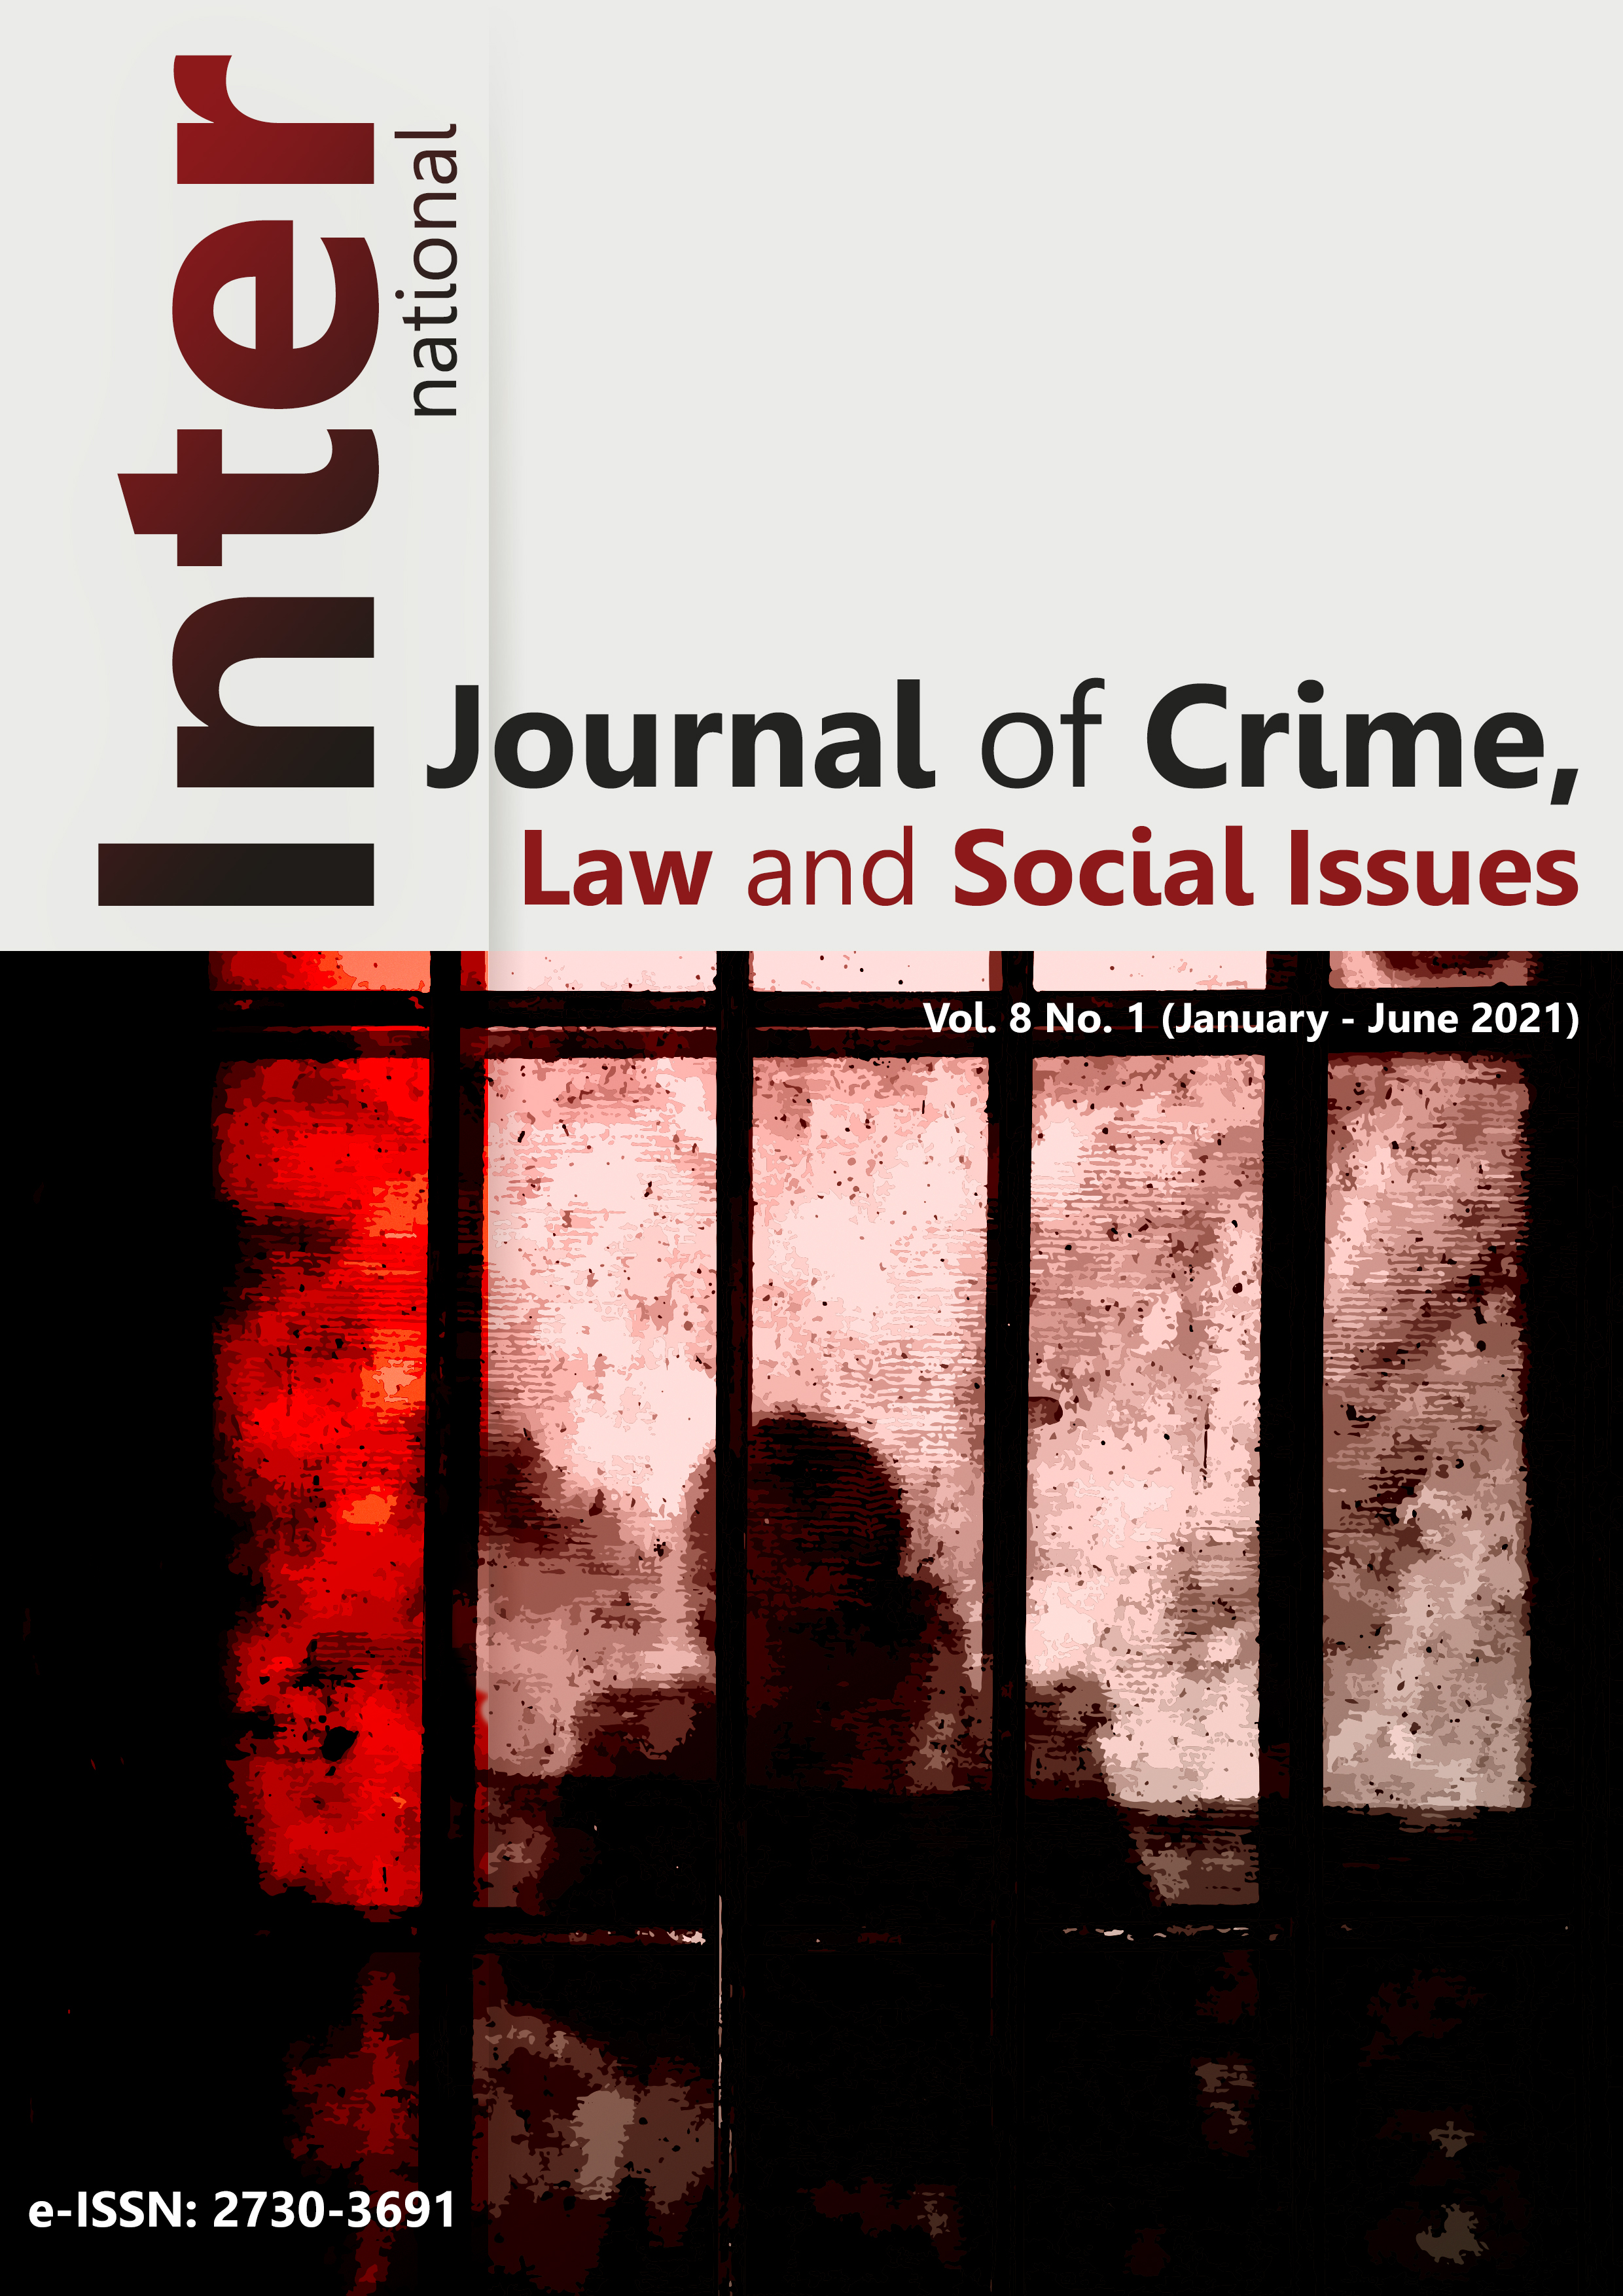 					View Vol. 8 No. 1 (2021): International Journal of Crime, Law and Social Issues
				